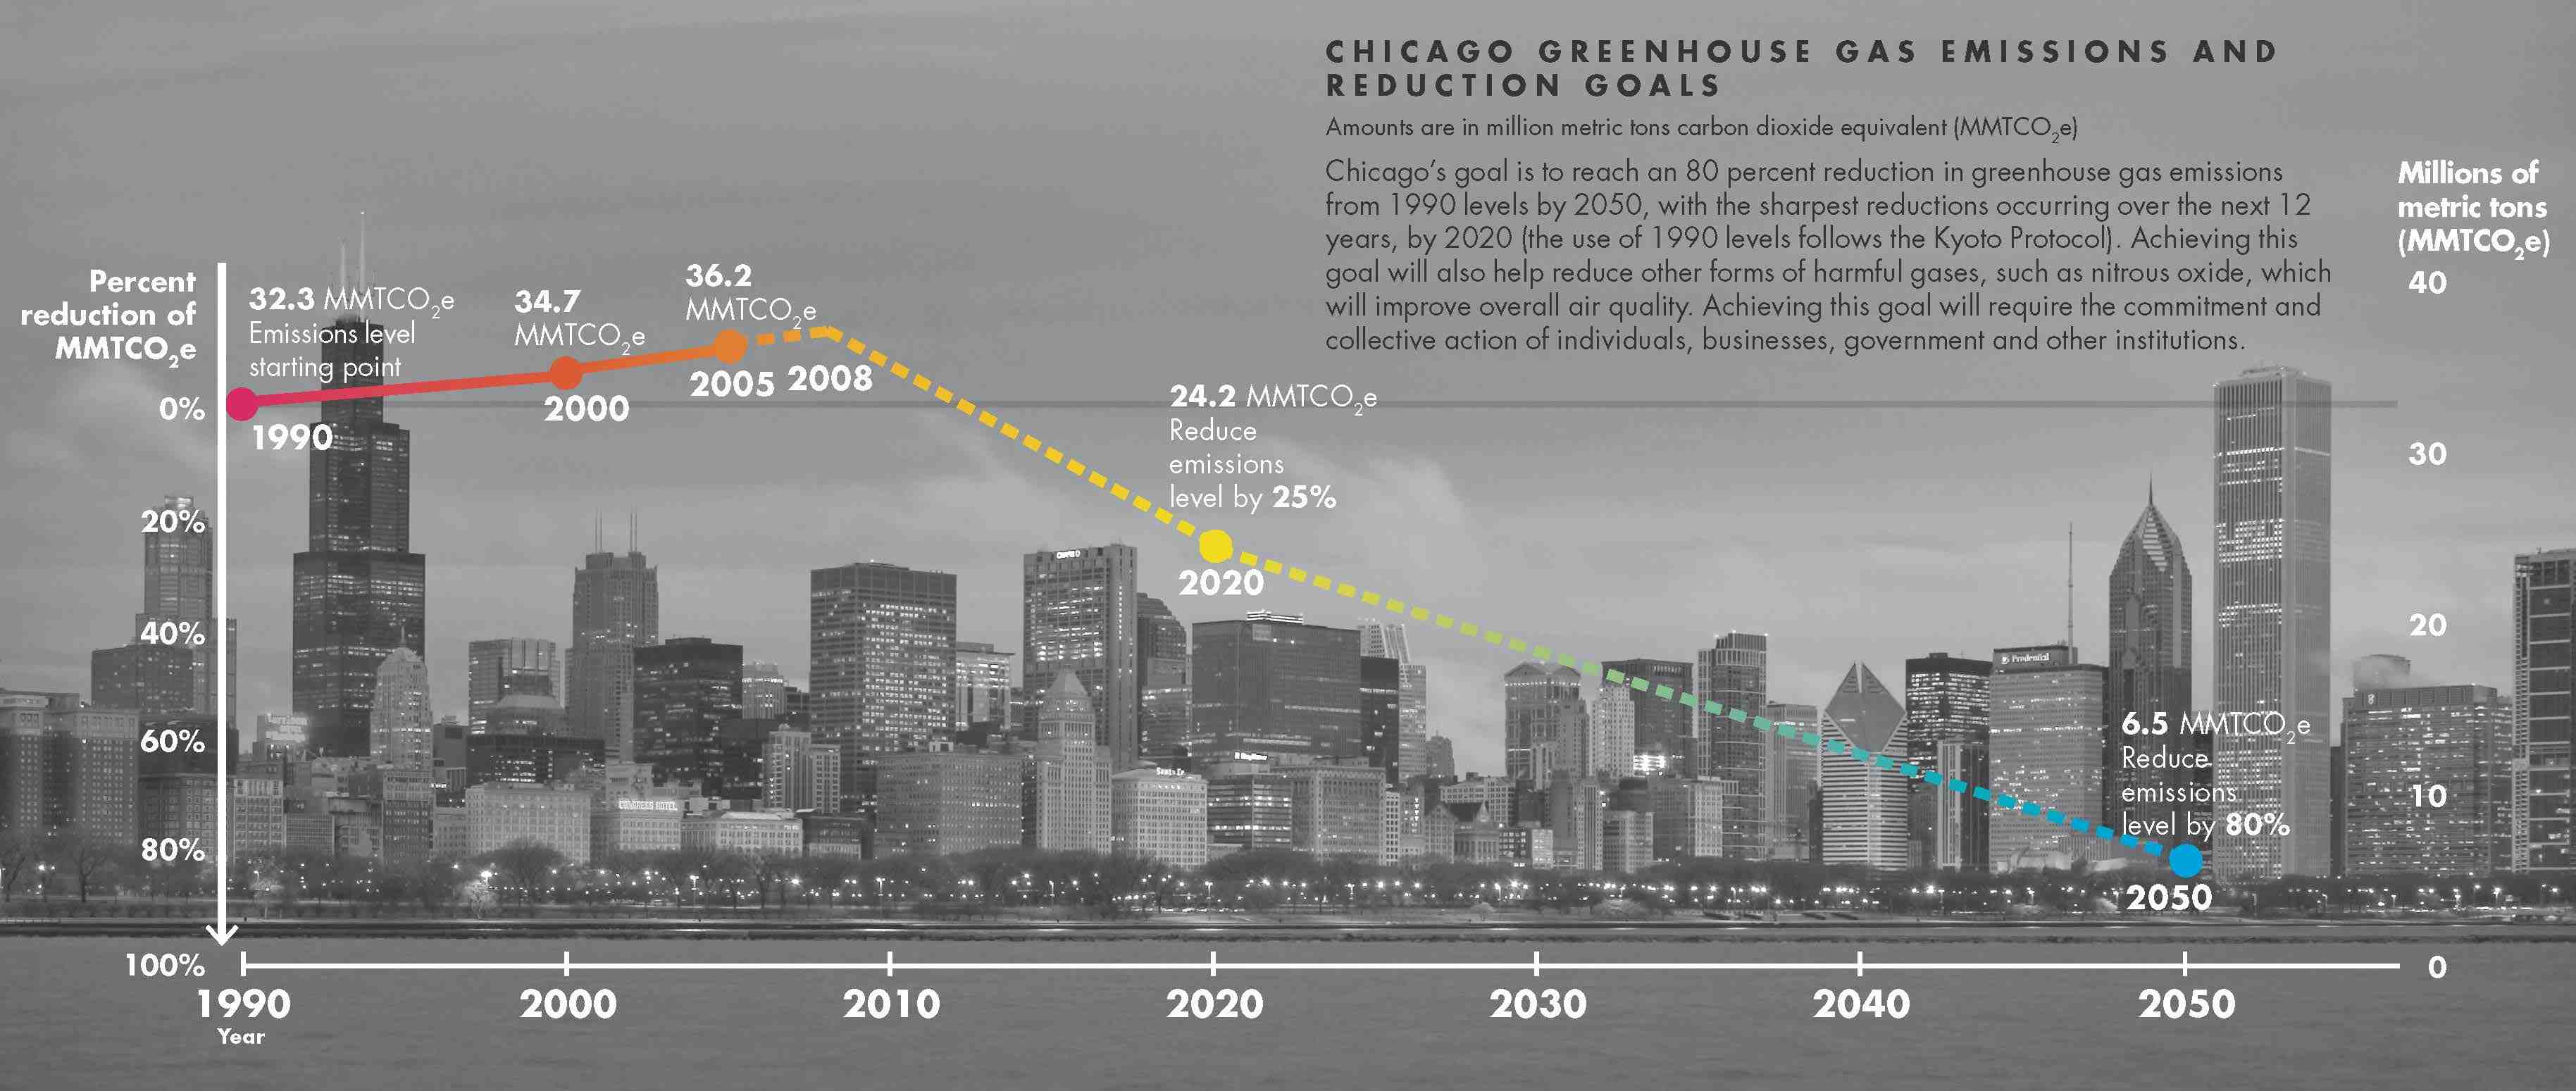 Chicago Greenhouse Gas Emissions and Reduction Goals